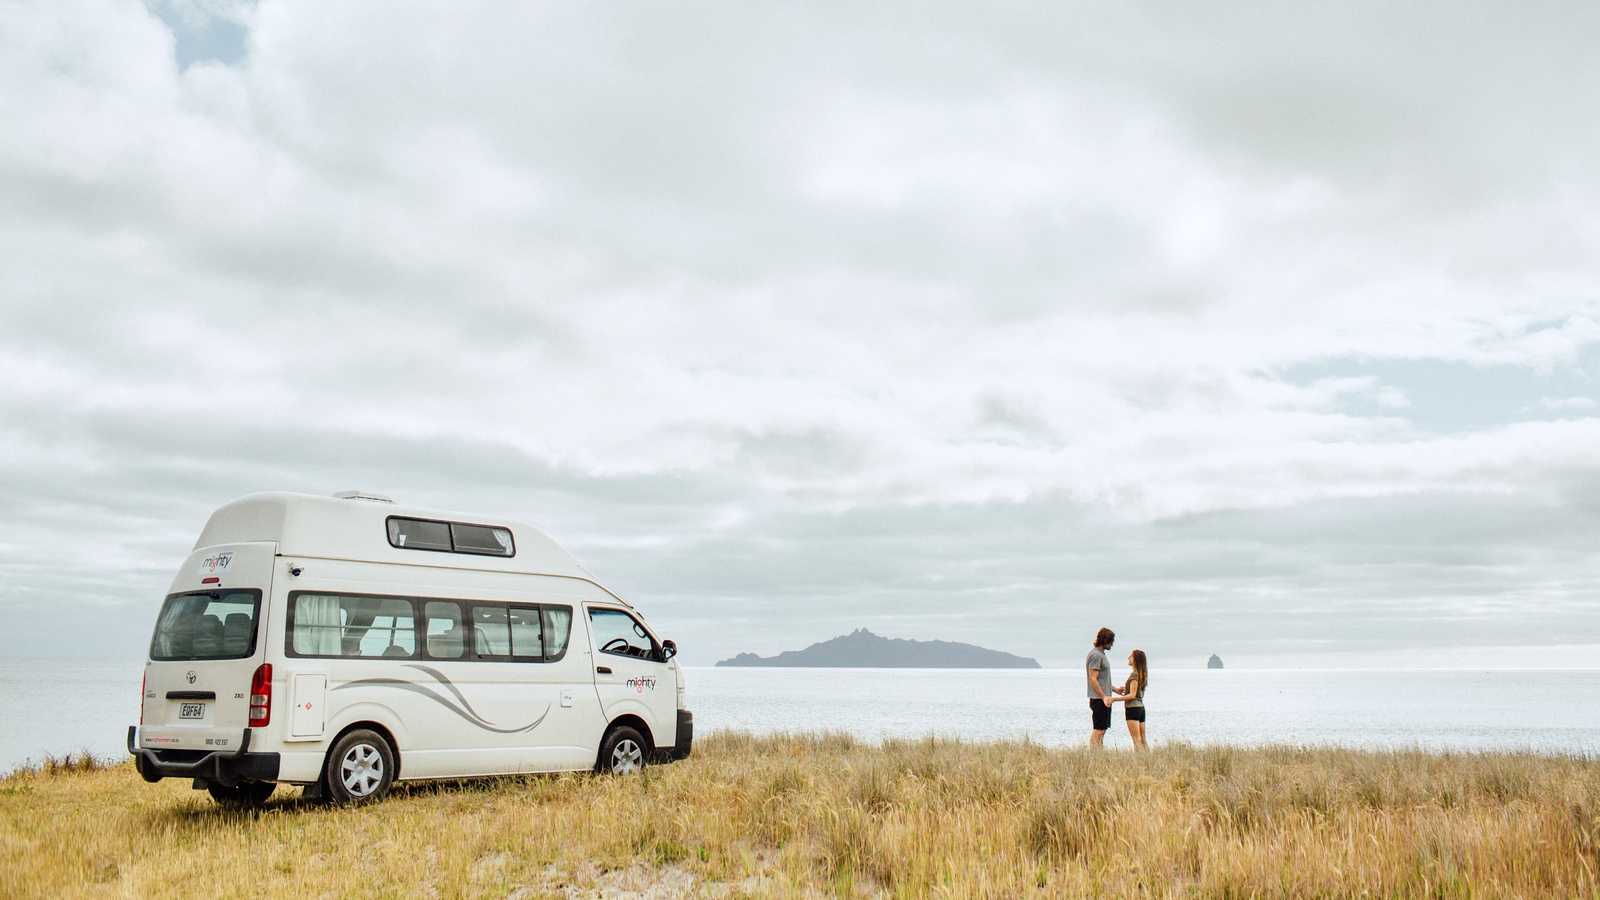 Mighty Highball autocamper - New Zealand